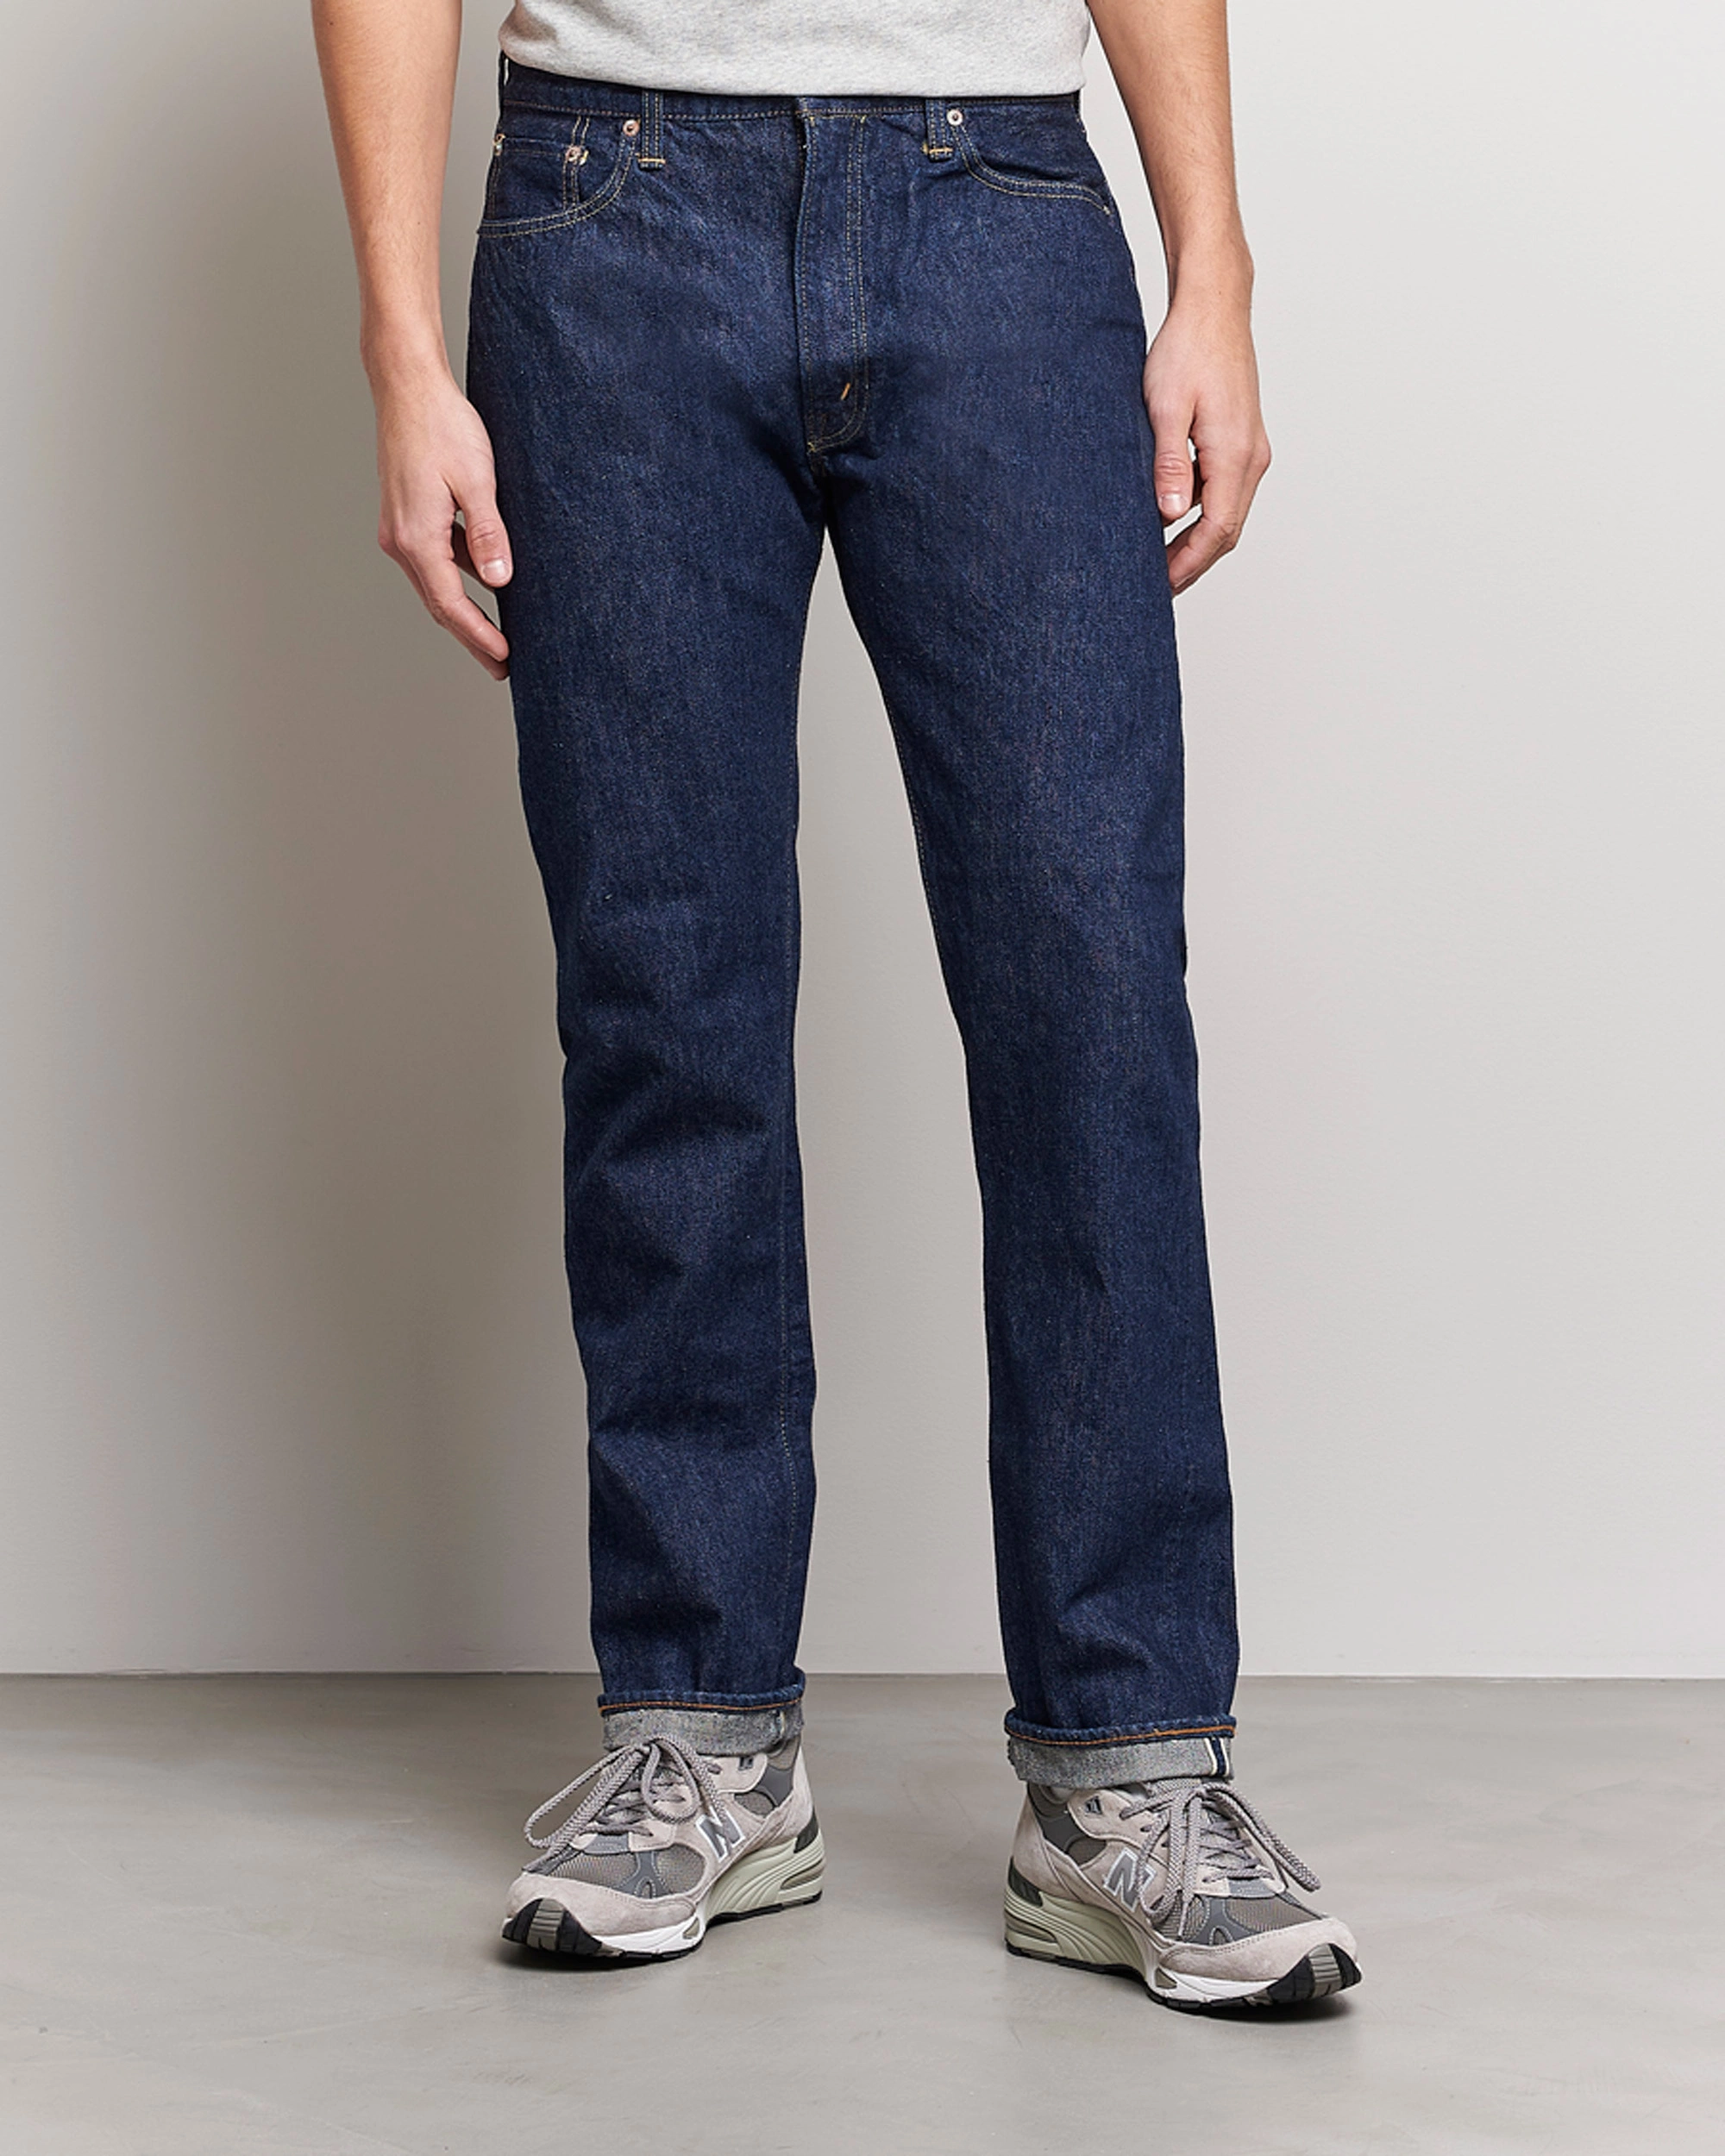 Herre | Jeans | orSlow | Slim Fit 107 Selvedge Jeans One Wash